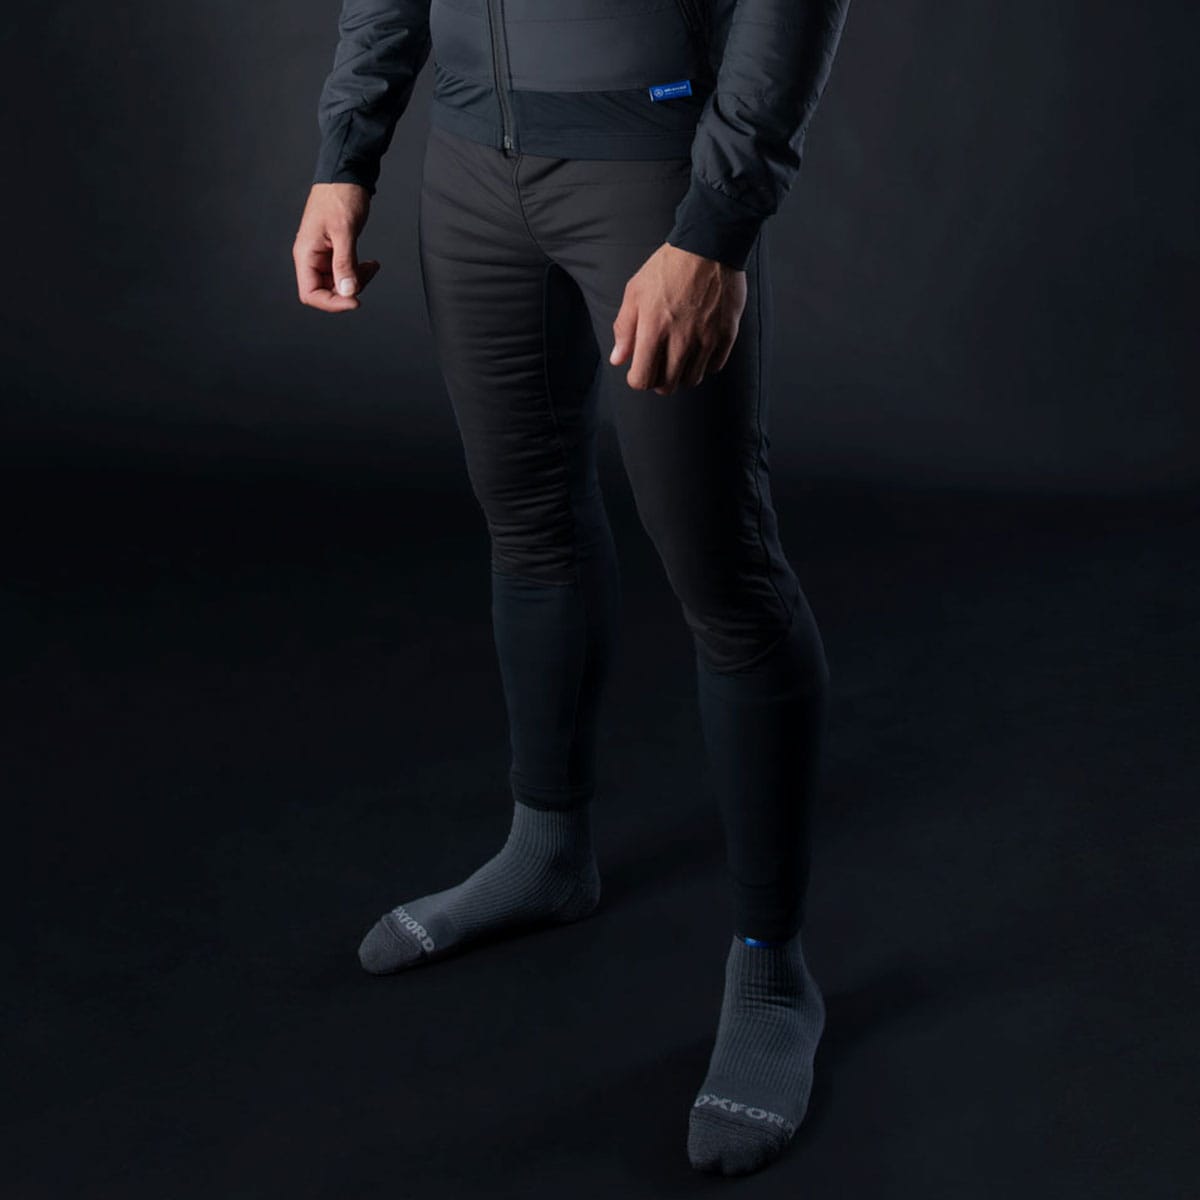 Stay Warm in any Weather Condition: The Oxford Expedition Layer Pants